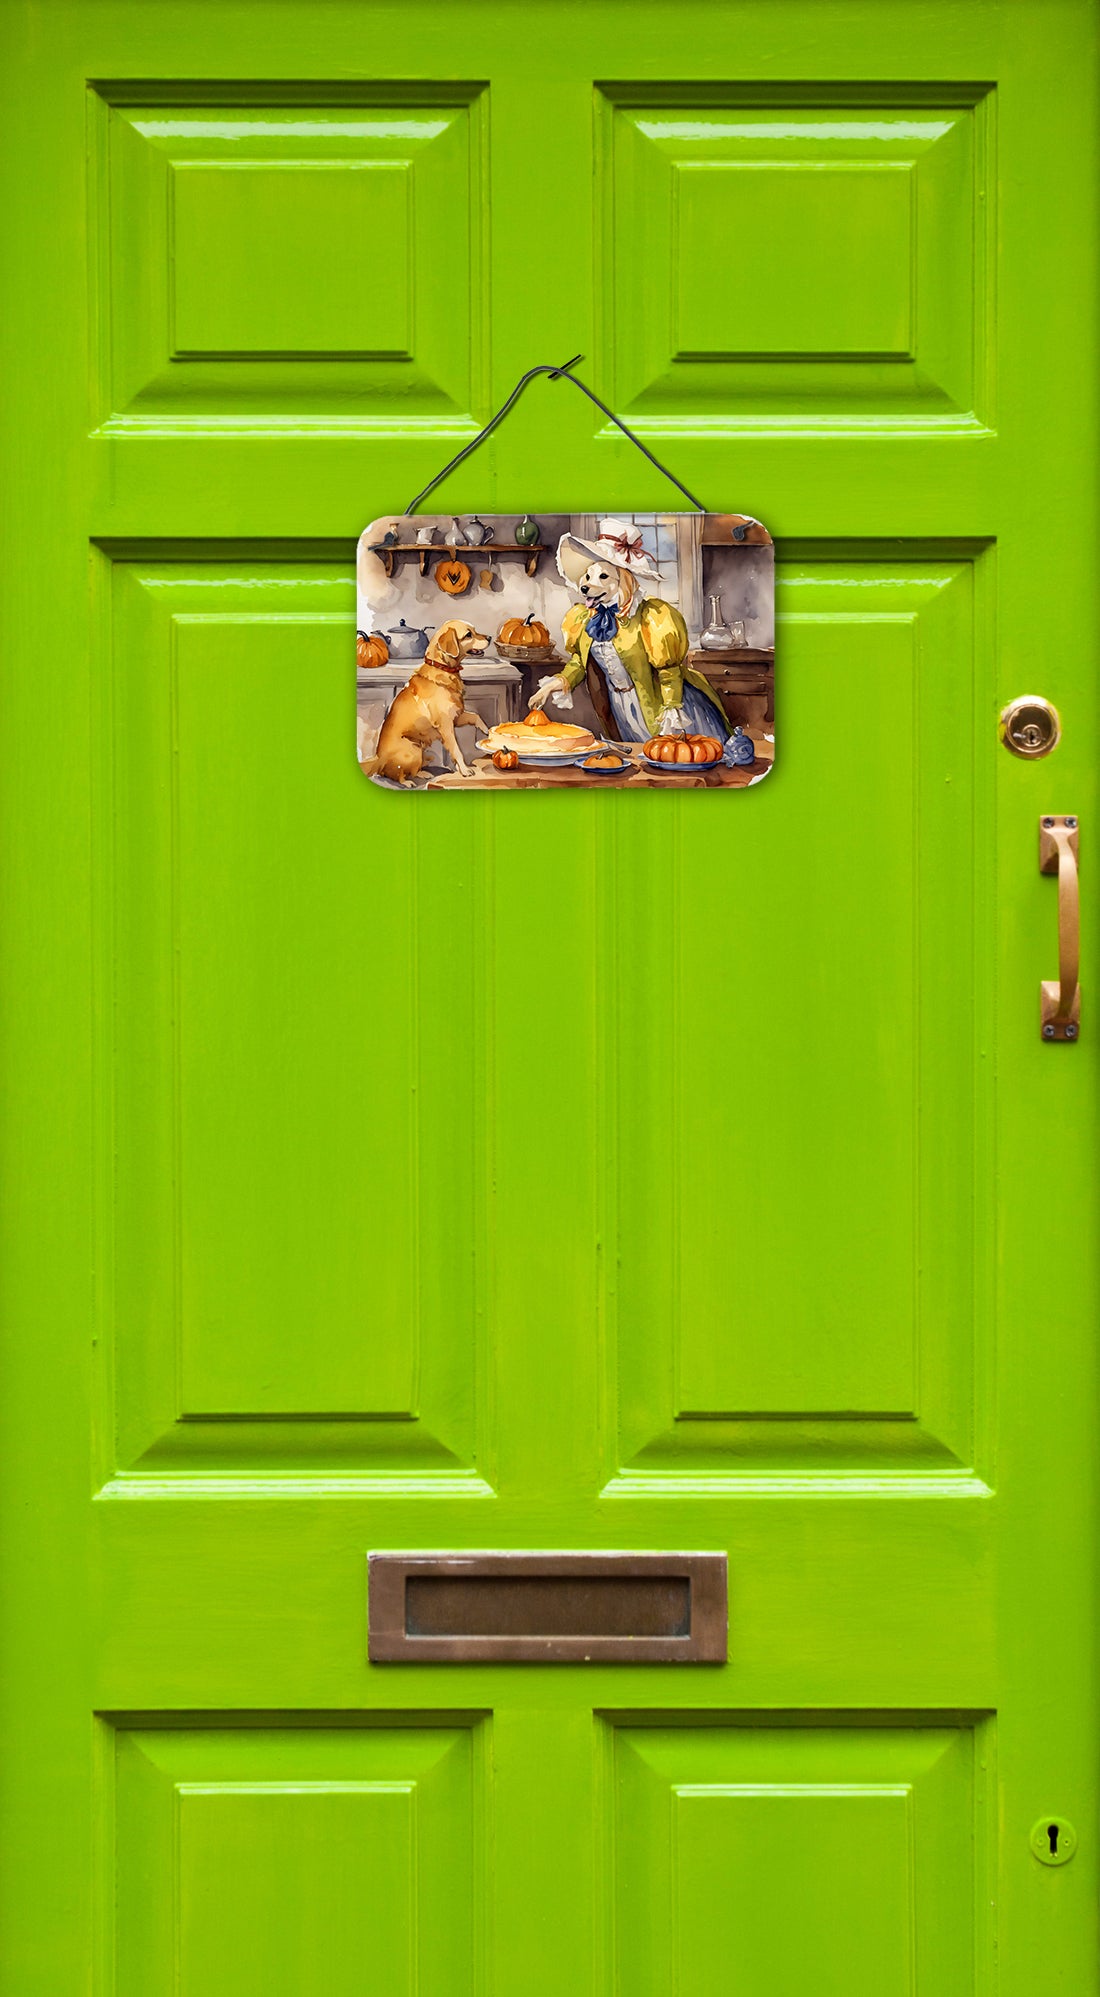 Buy this Yellow Lab Fall Kitchen Pumpkins Wall or Door Hanging Prints